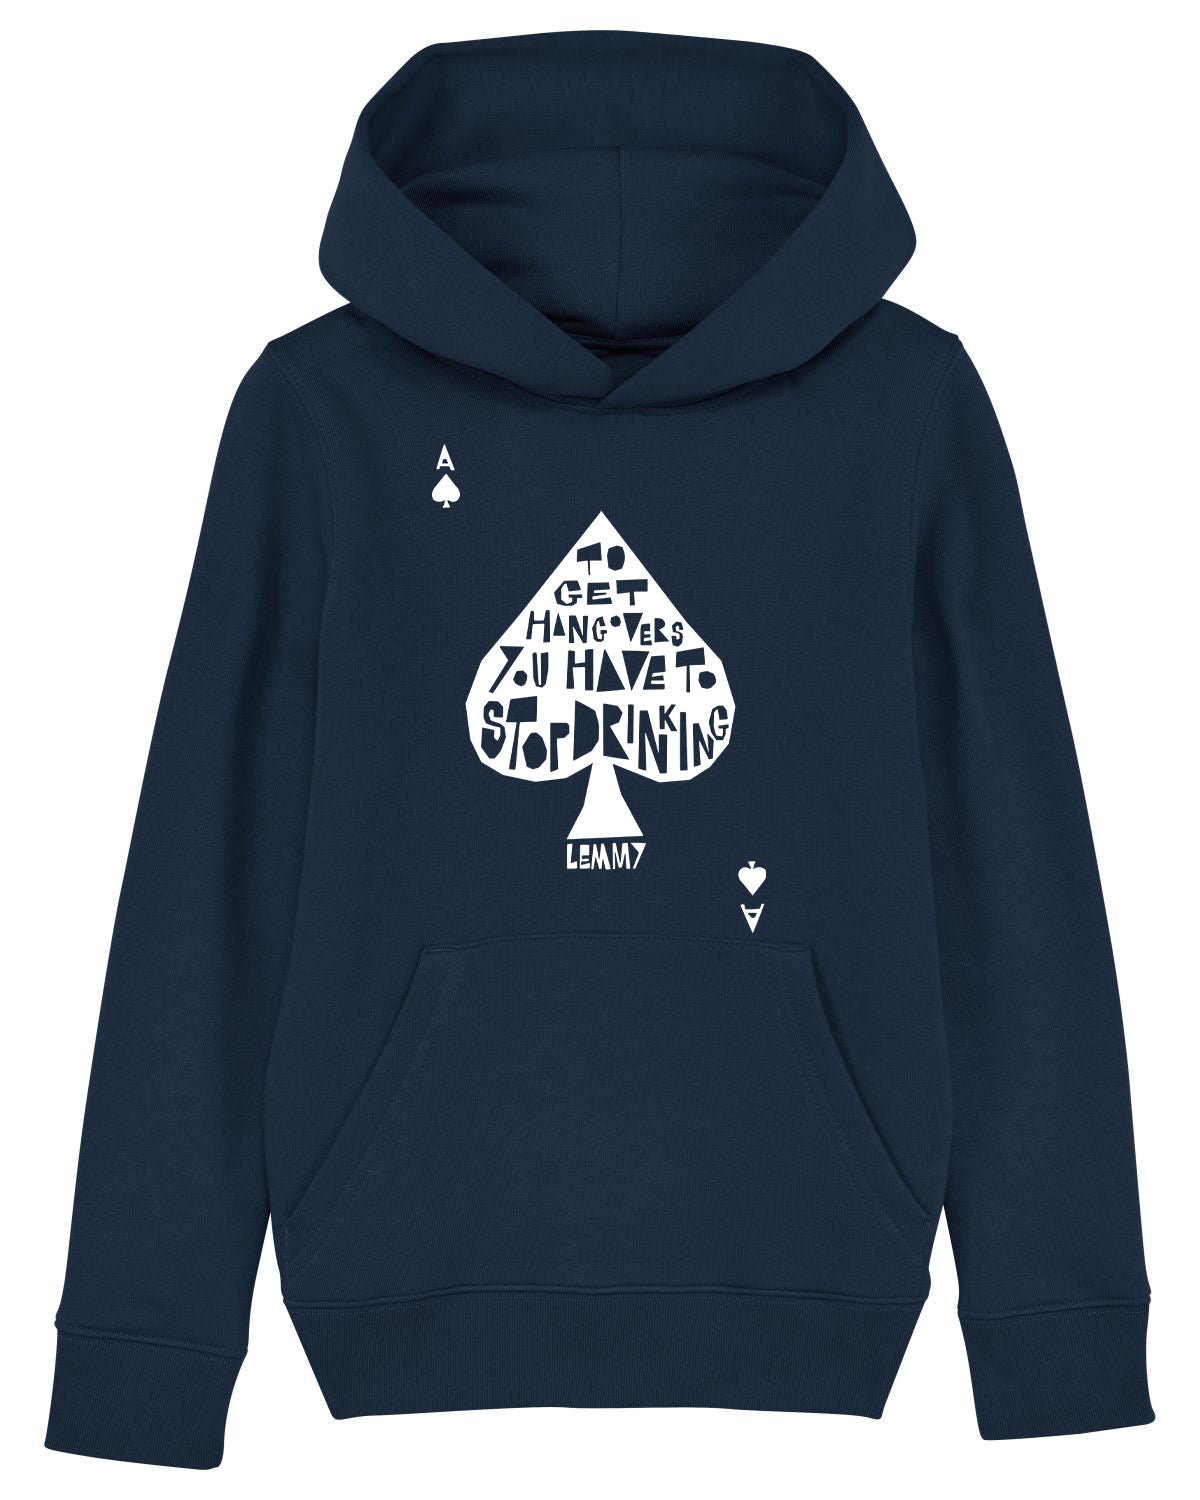 'To Get Hangovers You Have To Stop Drinking' Organic Adult Unisex Hoodie